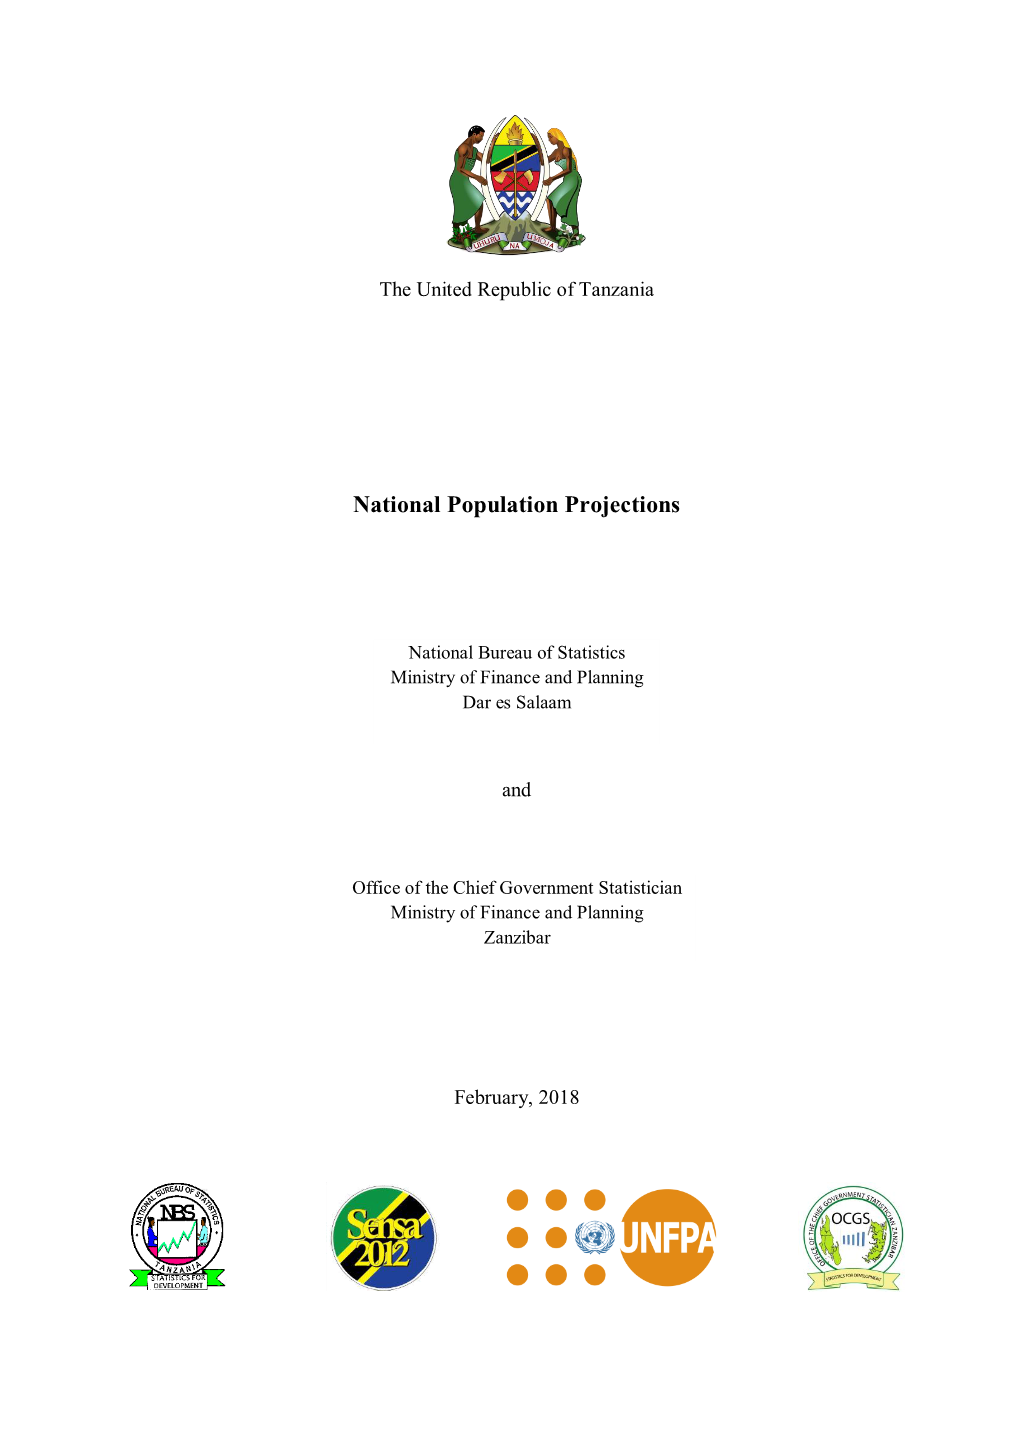 Read the Population Projection Report 2013